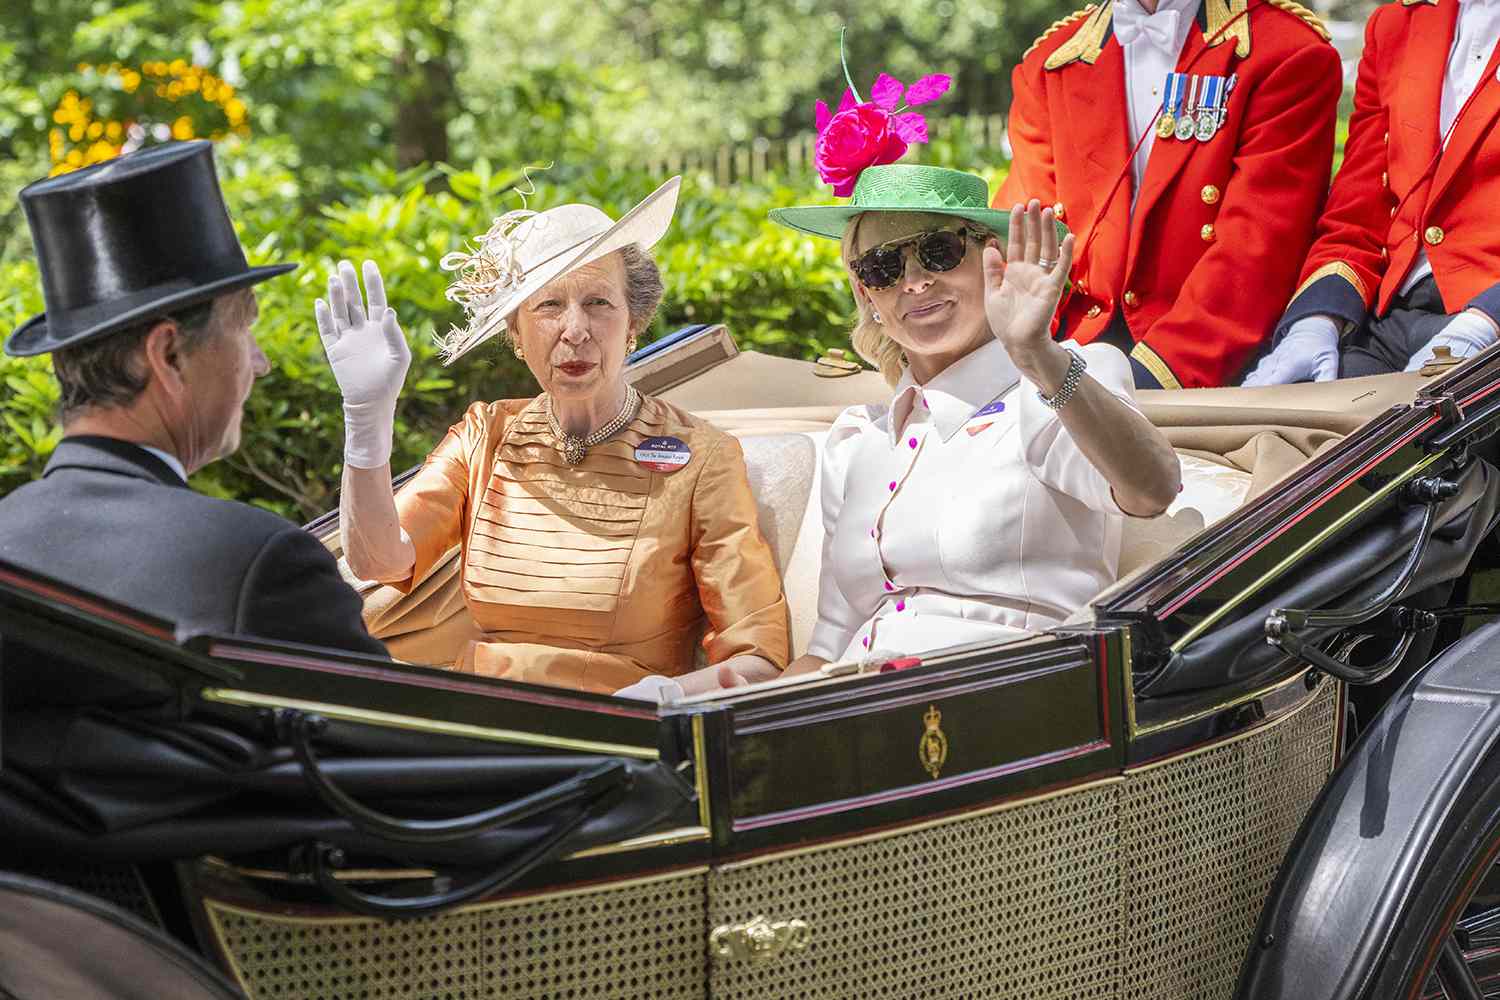 Members of the Royal Family arrive by carriage for Ladies Day at Royal Ascot 2022